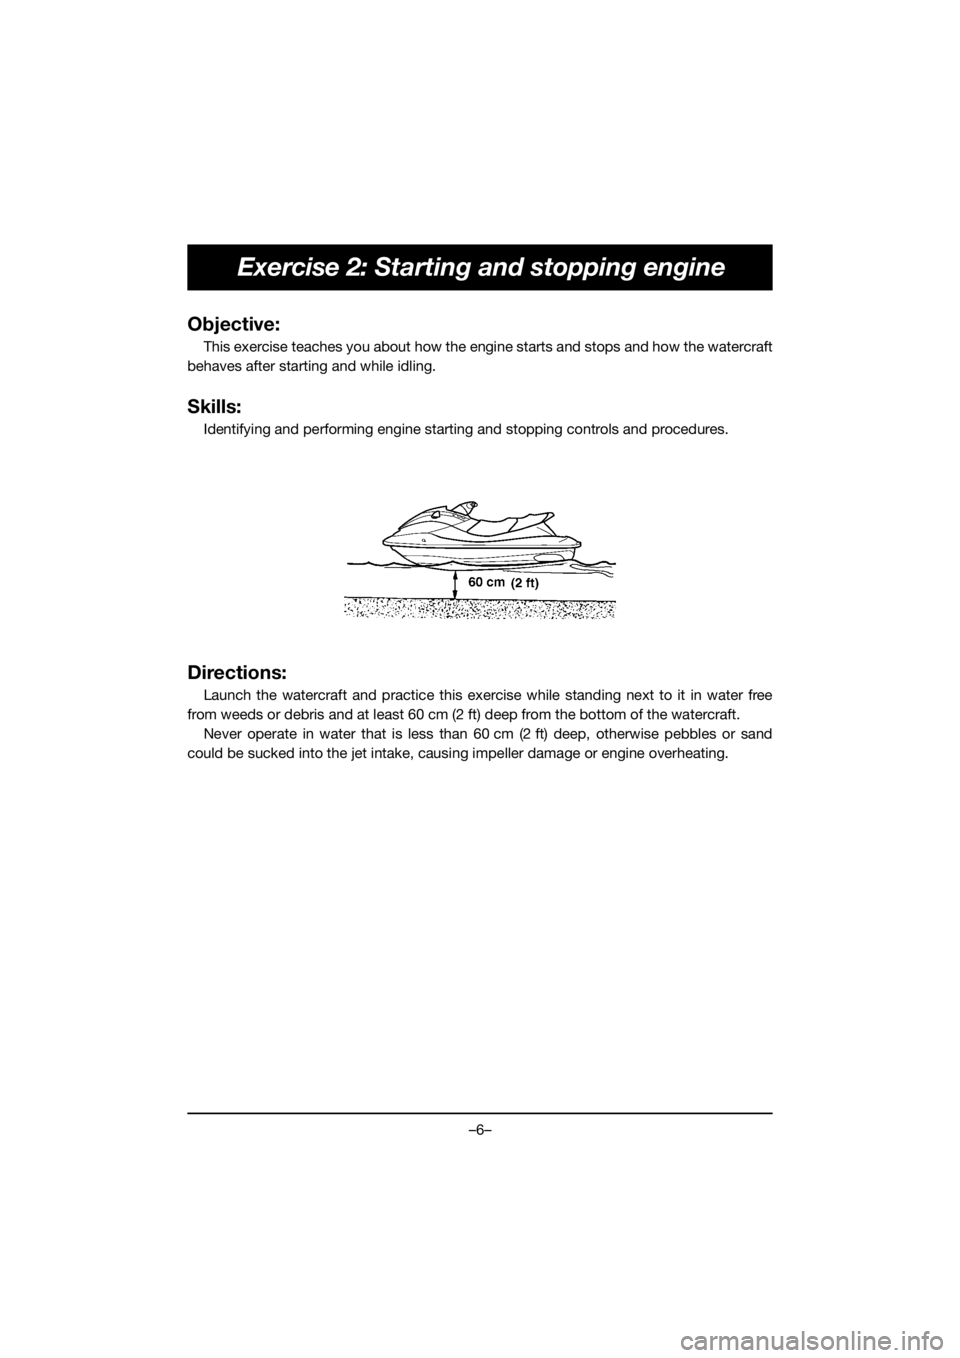 YAMAHA FX HO 2018  Manuale duso (in Italian) –6–
Exercise 2: Starting and stopping engine
Objective:
This exercise teaches you about how the engine starts and stops and how the watercraft
behaves after starting and while idling.
Skills:
Iden